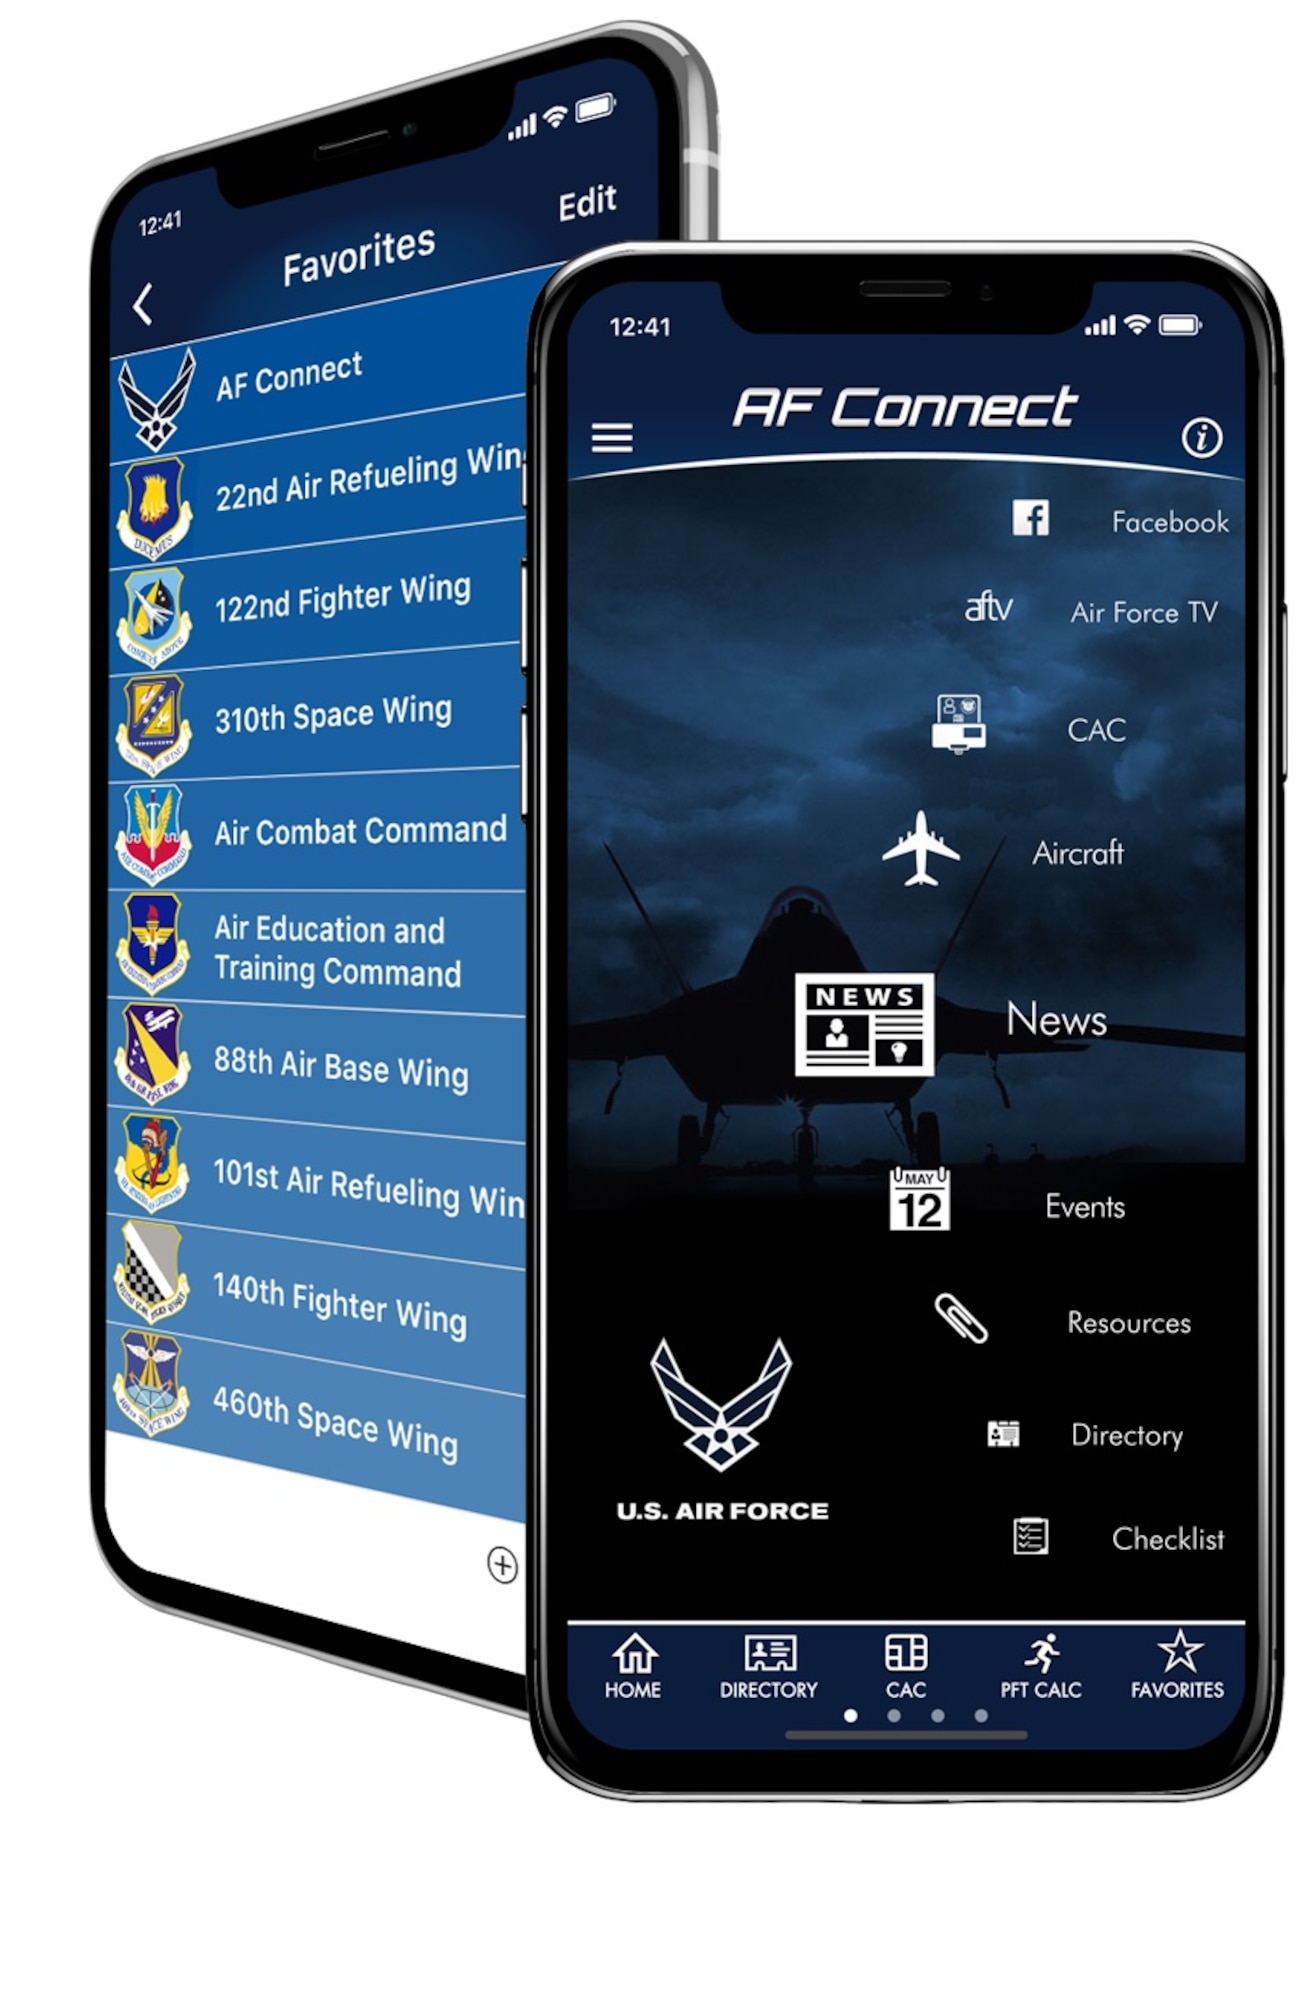 The Office of Special Investigations is one of more than 100 organization "Favorites" on the enterprise-wide Air Force Connect mobile app, designed to provide streamlined access to timely and relevant information users need for their lives and careers. (Air Force Connect photo)